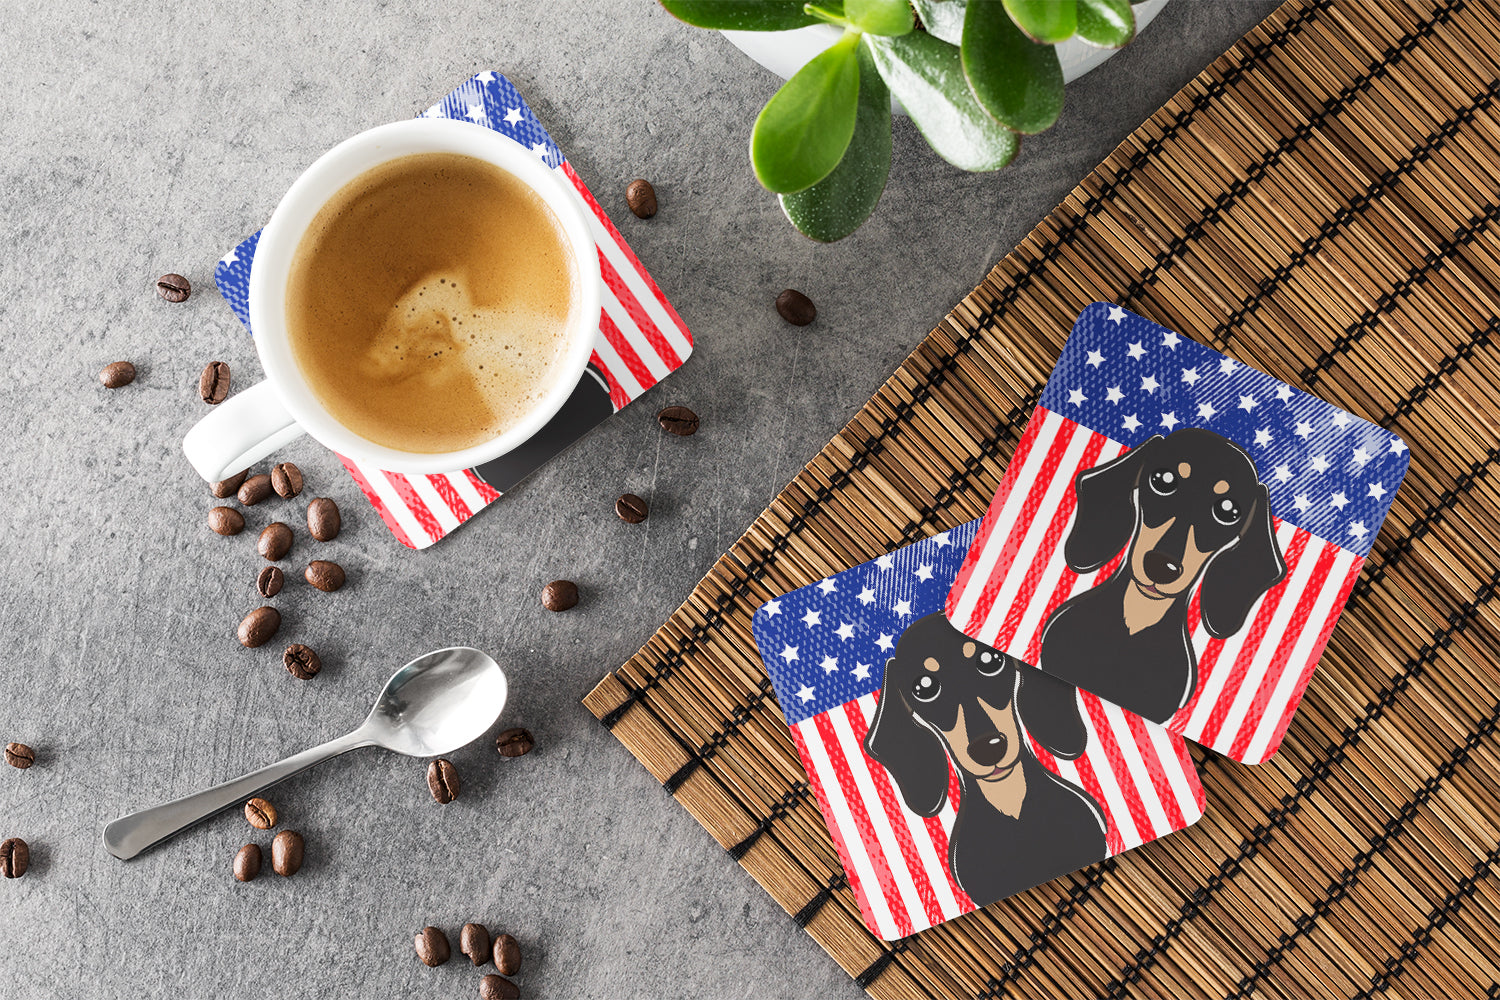 American Flag and Smooth Black and Tan Dachshund Foam Coaster Set of 4 - the-store.com